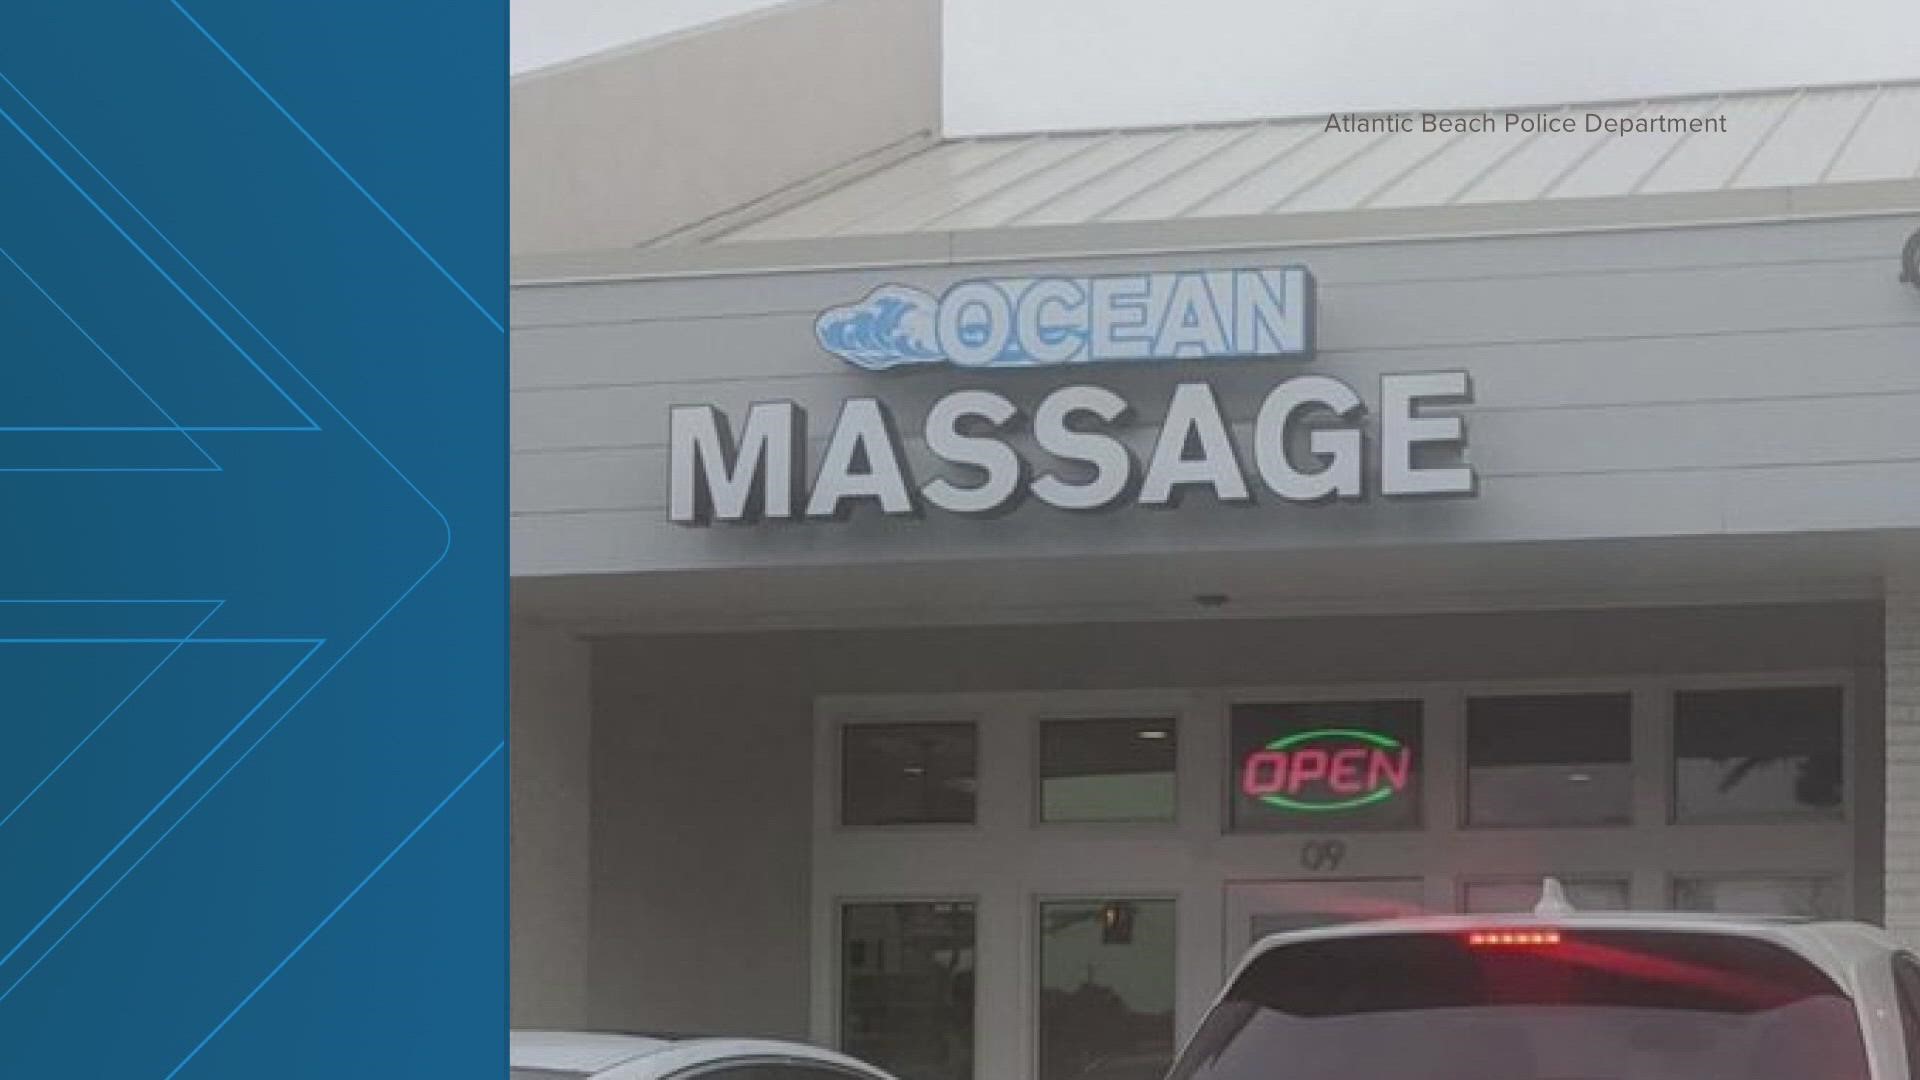 Police say they were receiving complaints from people who had noticed suspicious behaviors at Ocean Massage.